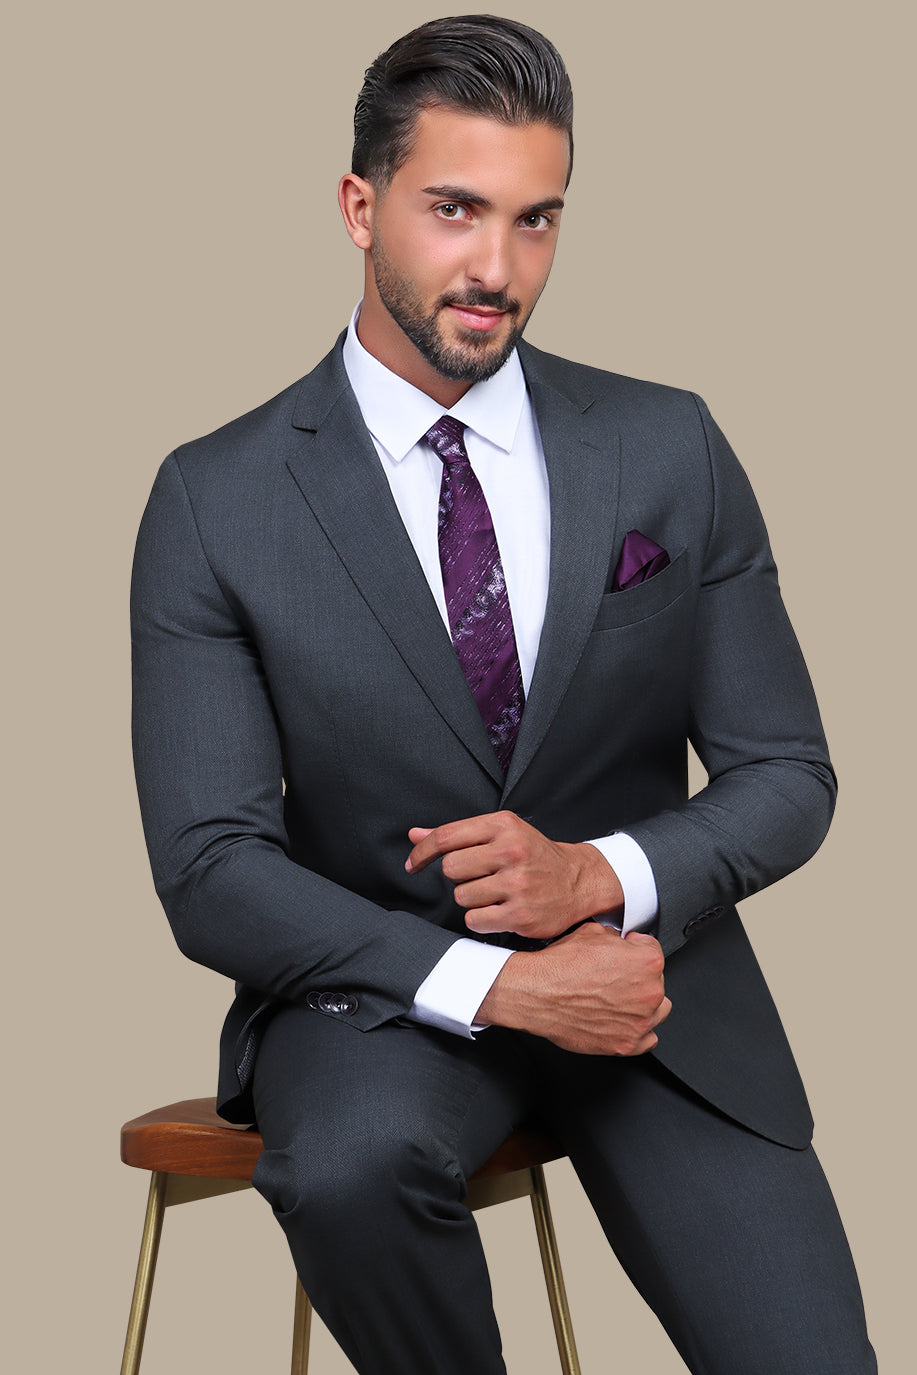 10 Chic Grey Suit & Blue Shirt Outfits for Men - ATG